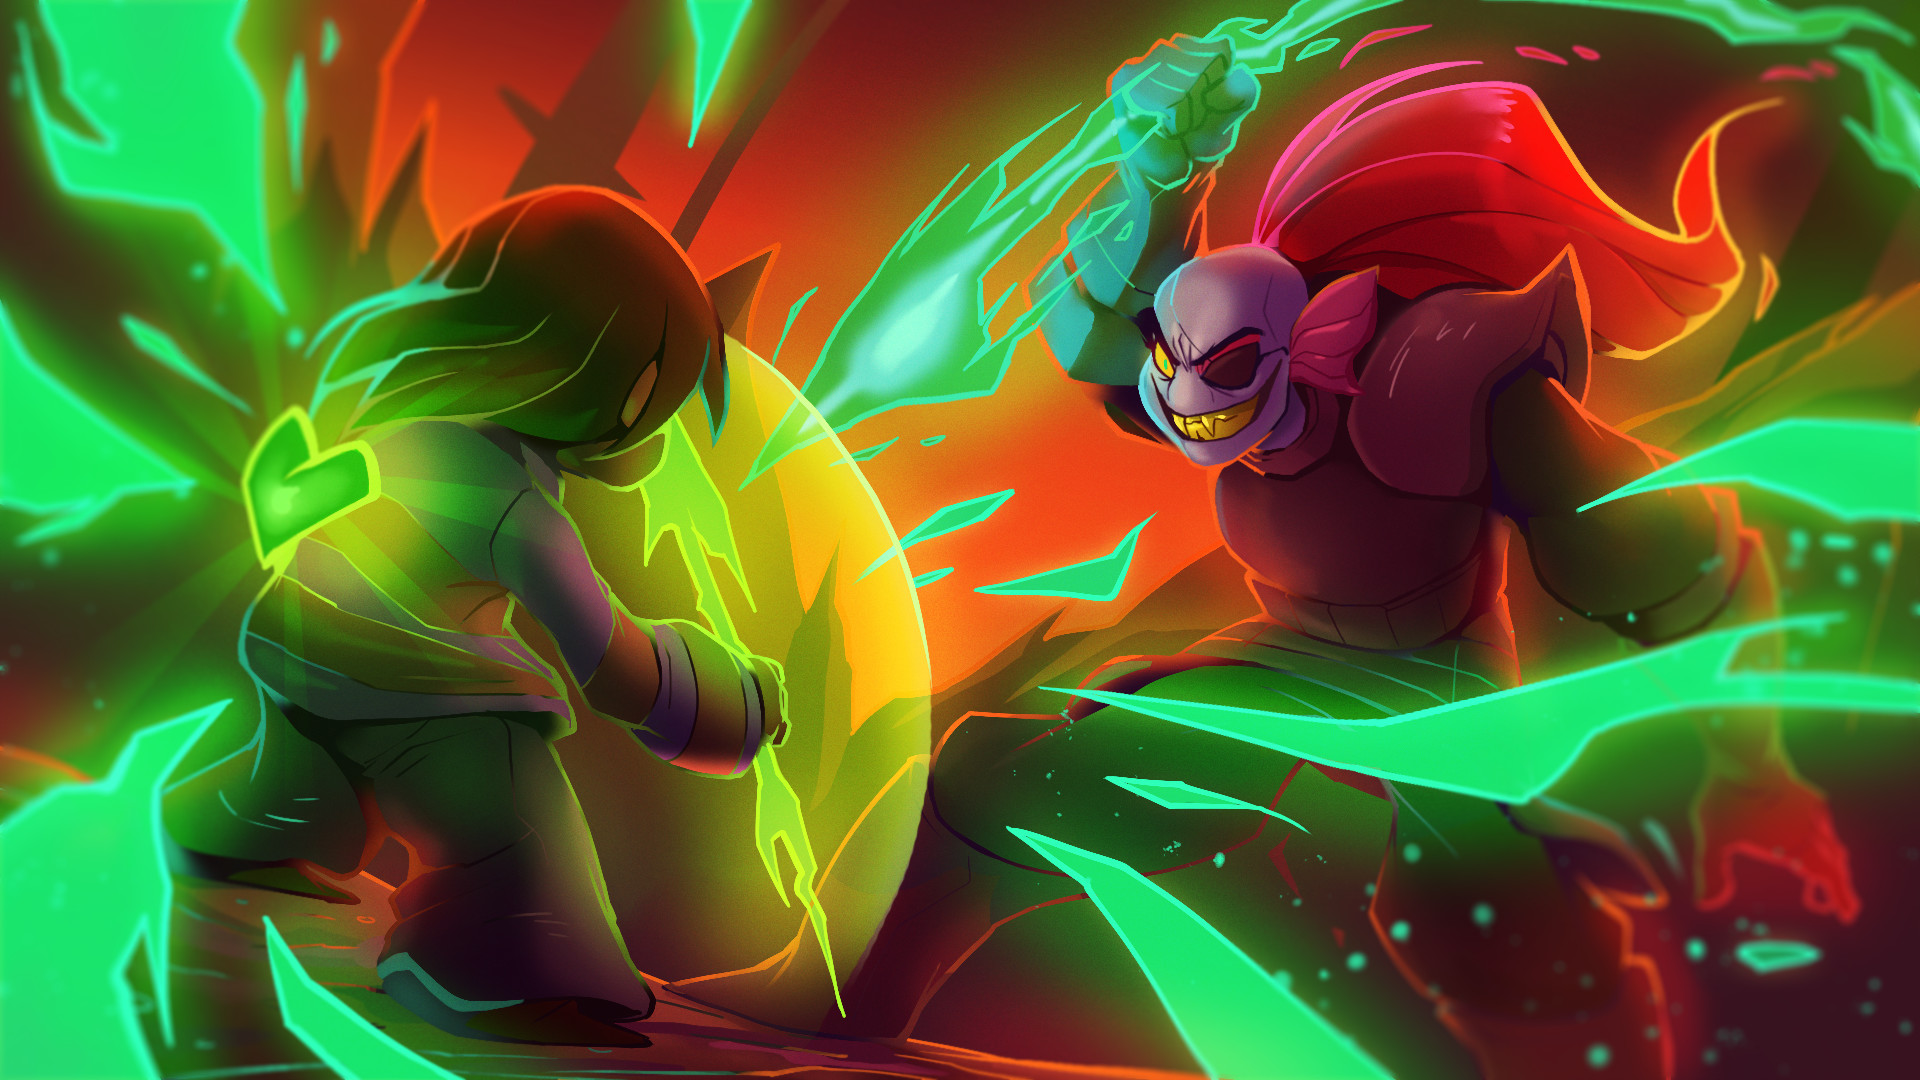 Undertale Wallpapers (boss battles of genocide, neutral, and pacifist  endings)